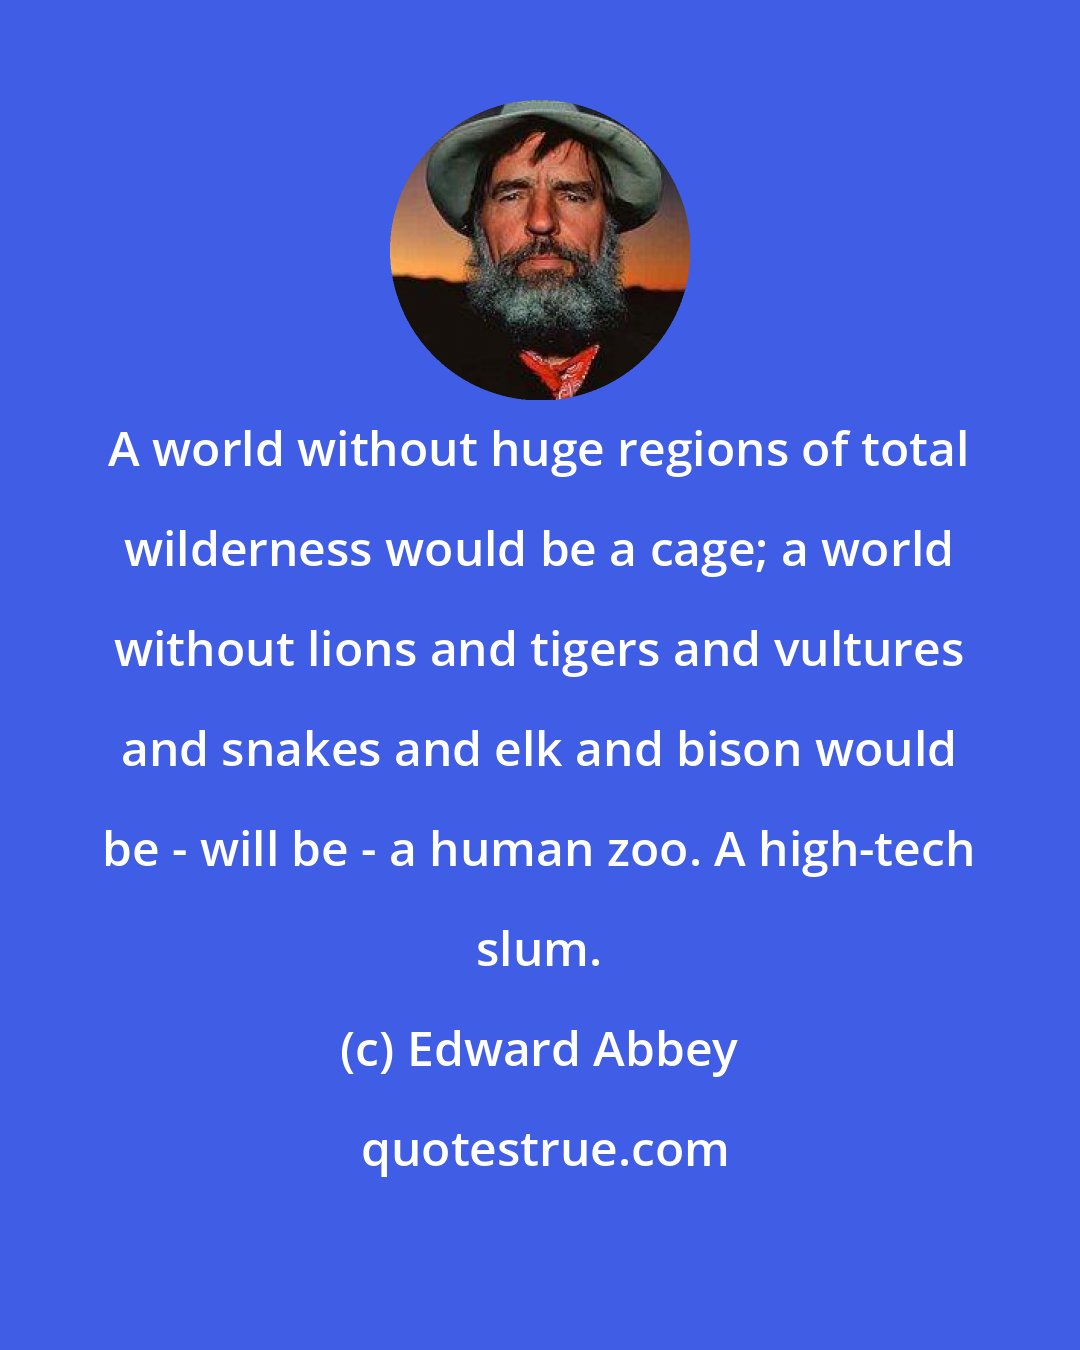 Edward Abbey: A world without huge regions of total wilderness would be a cage; a world without lions and tigers and vultures and snakes and elk and bison would be - will be - a human zoo. A high-tech slum.